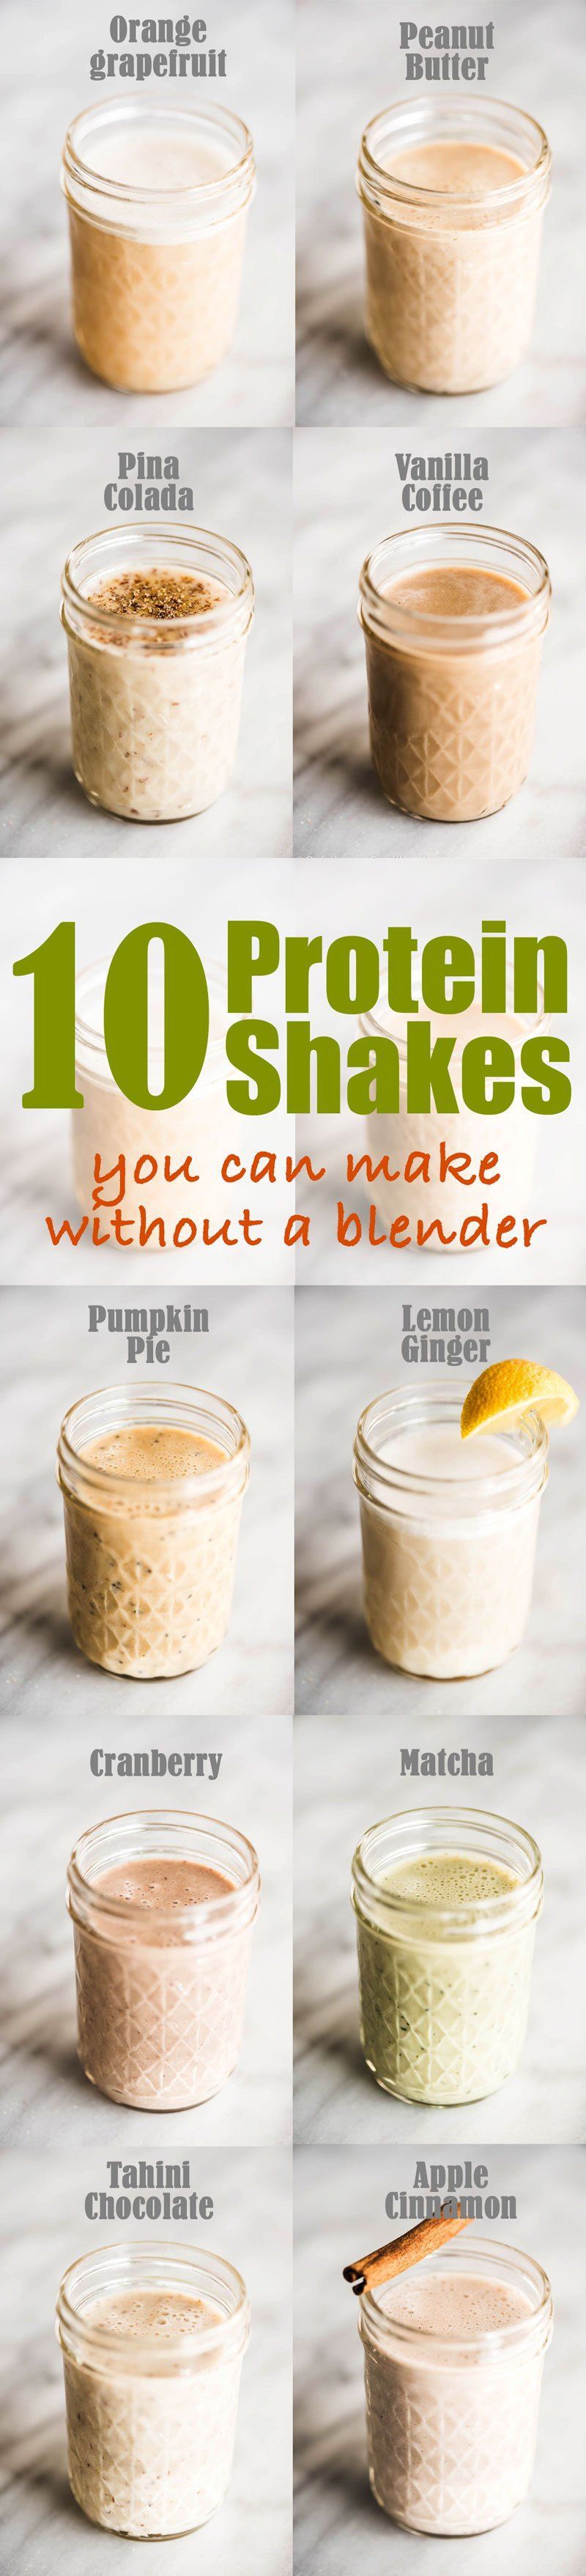 10 Easy Protein Shake Recipes You Can Make Without a Blender #sponsored